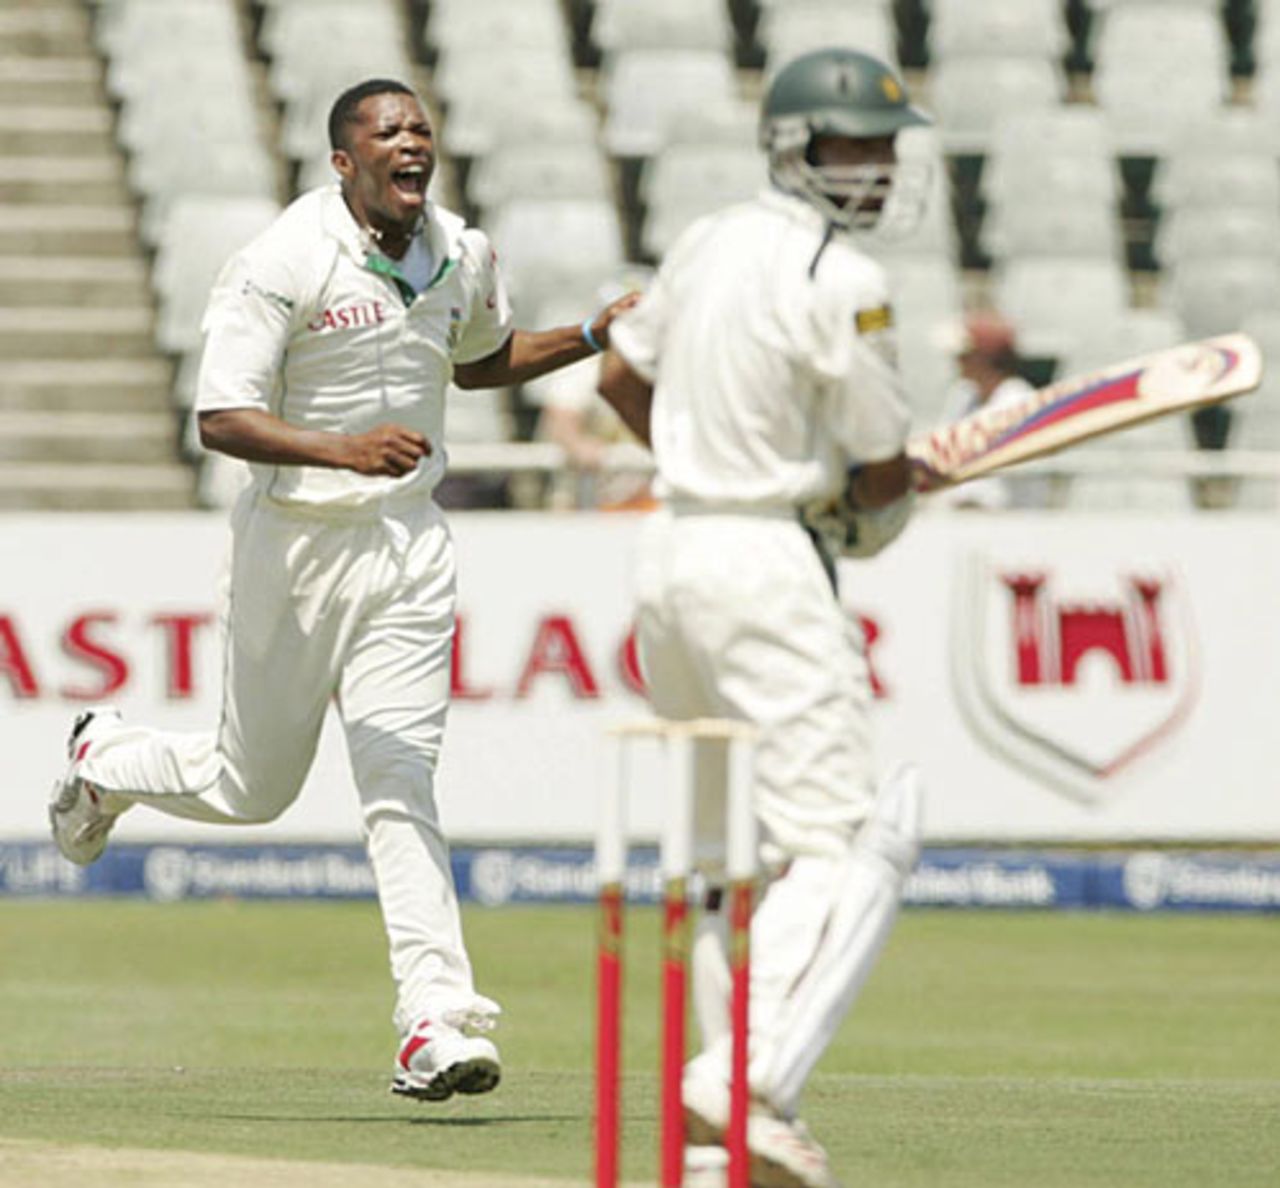 Makhaya Ntini removes Yasir Hameed, South Africa v Pakistan, 3rd Test, Cape Town, January 26, 2007